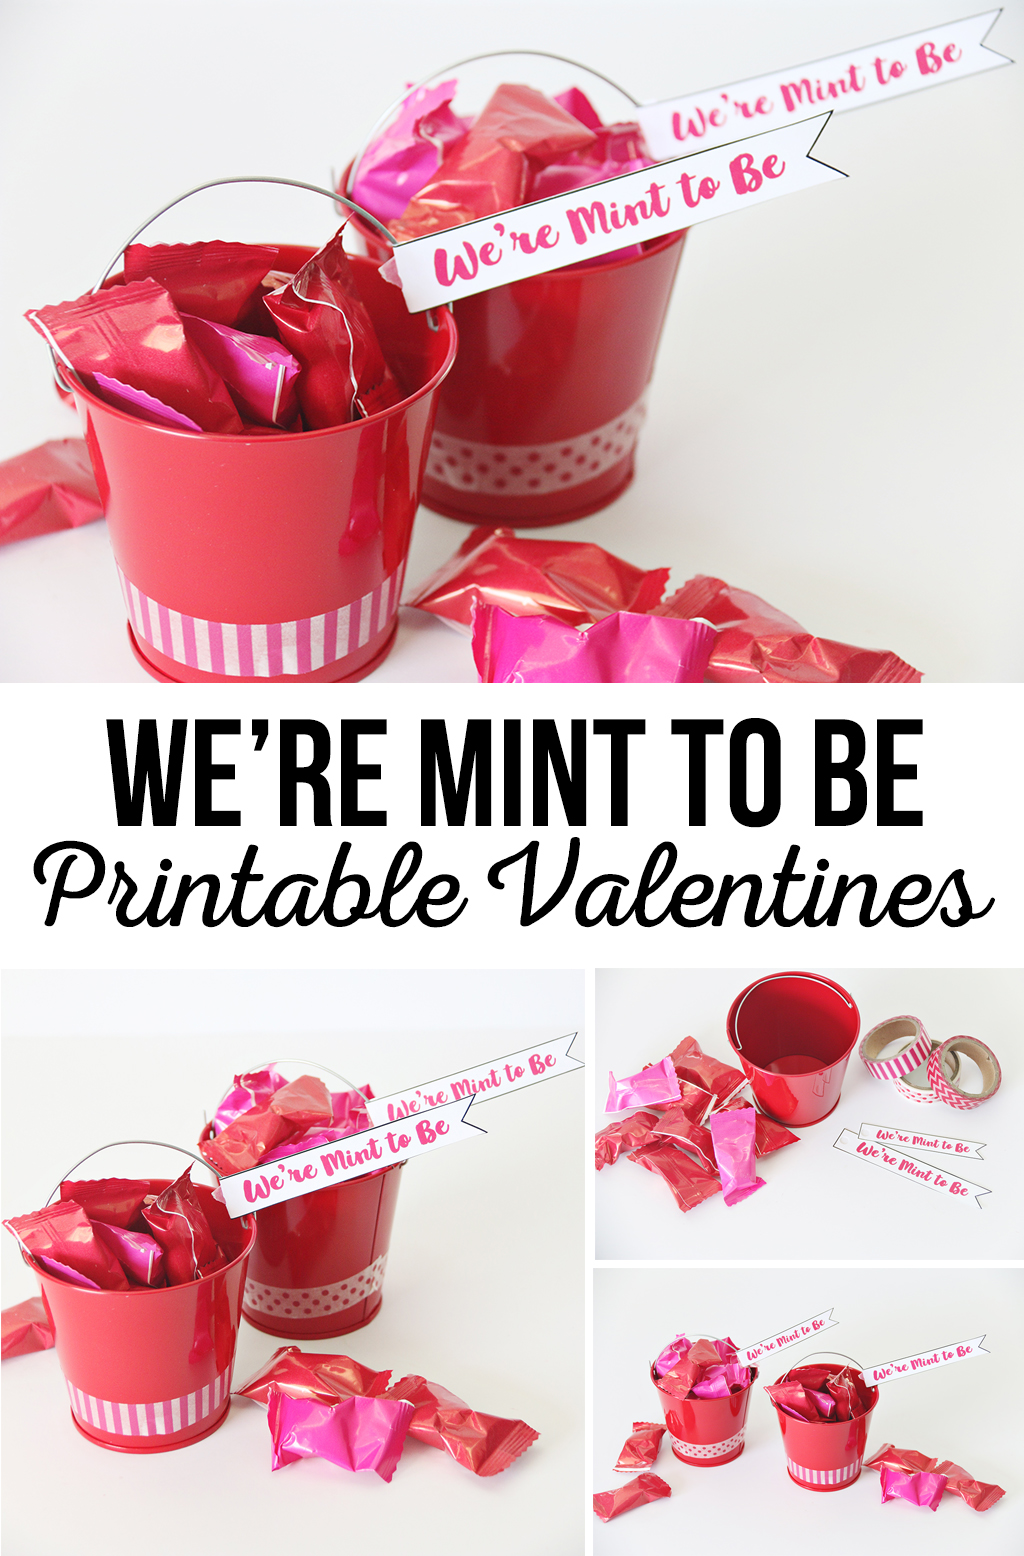 We're Mint to Be Printable Valentines